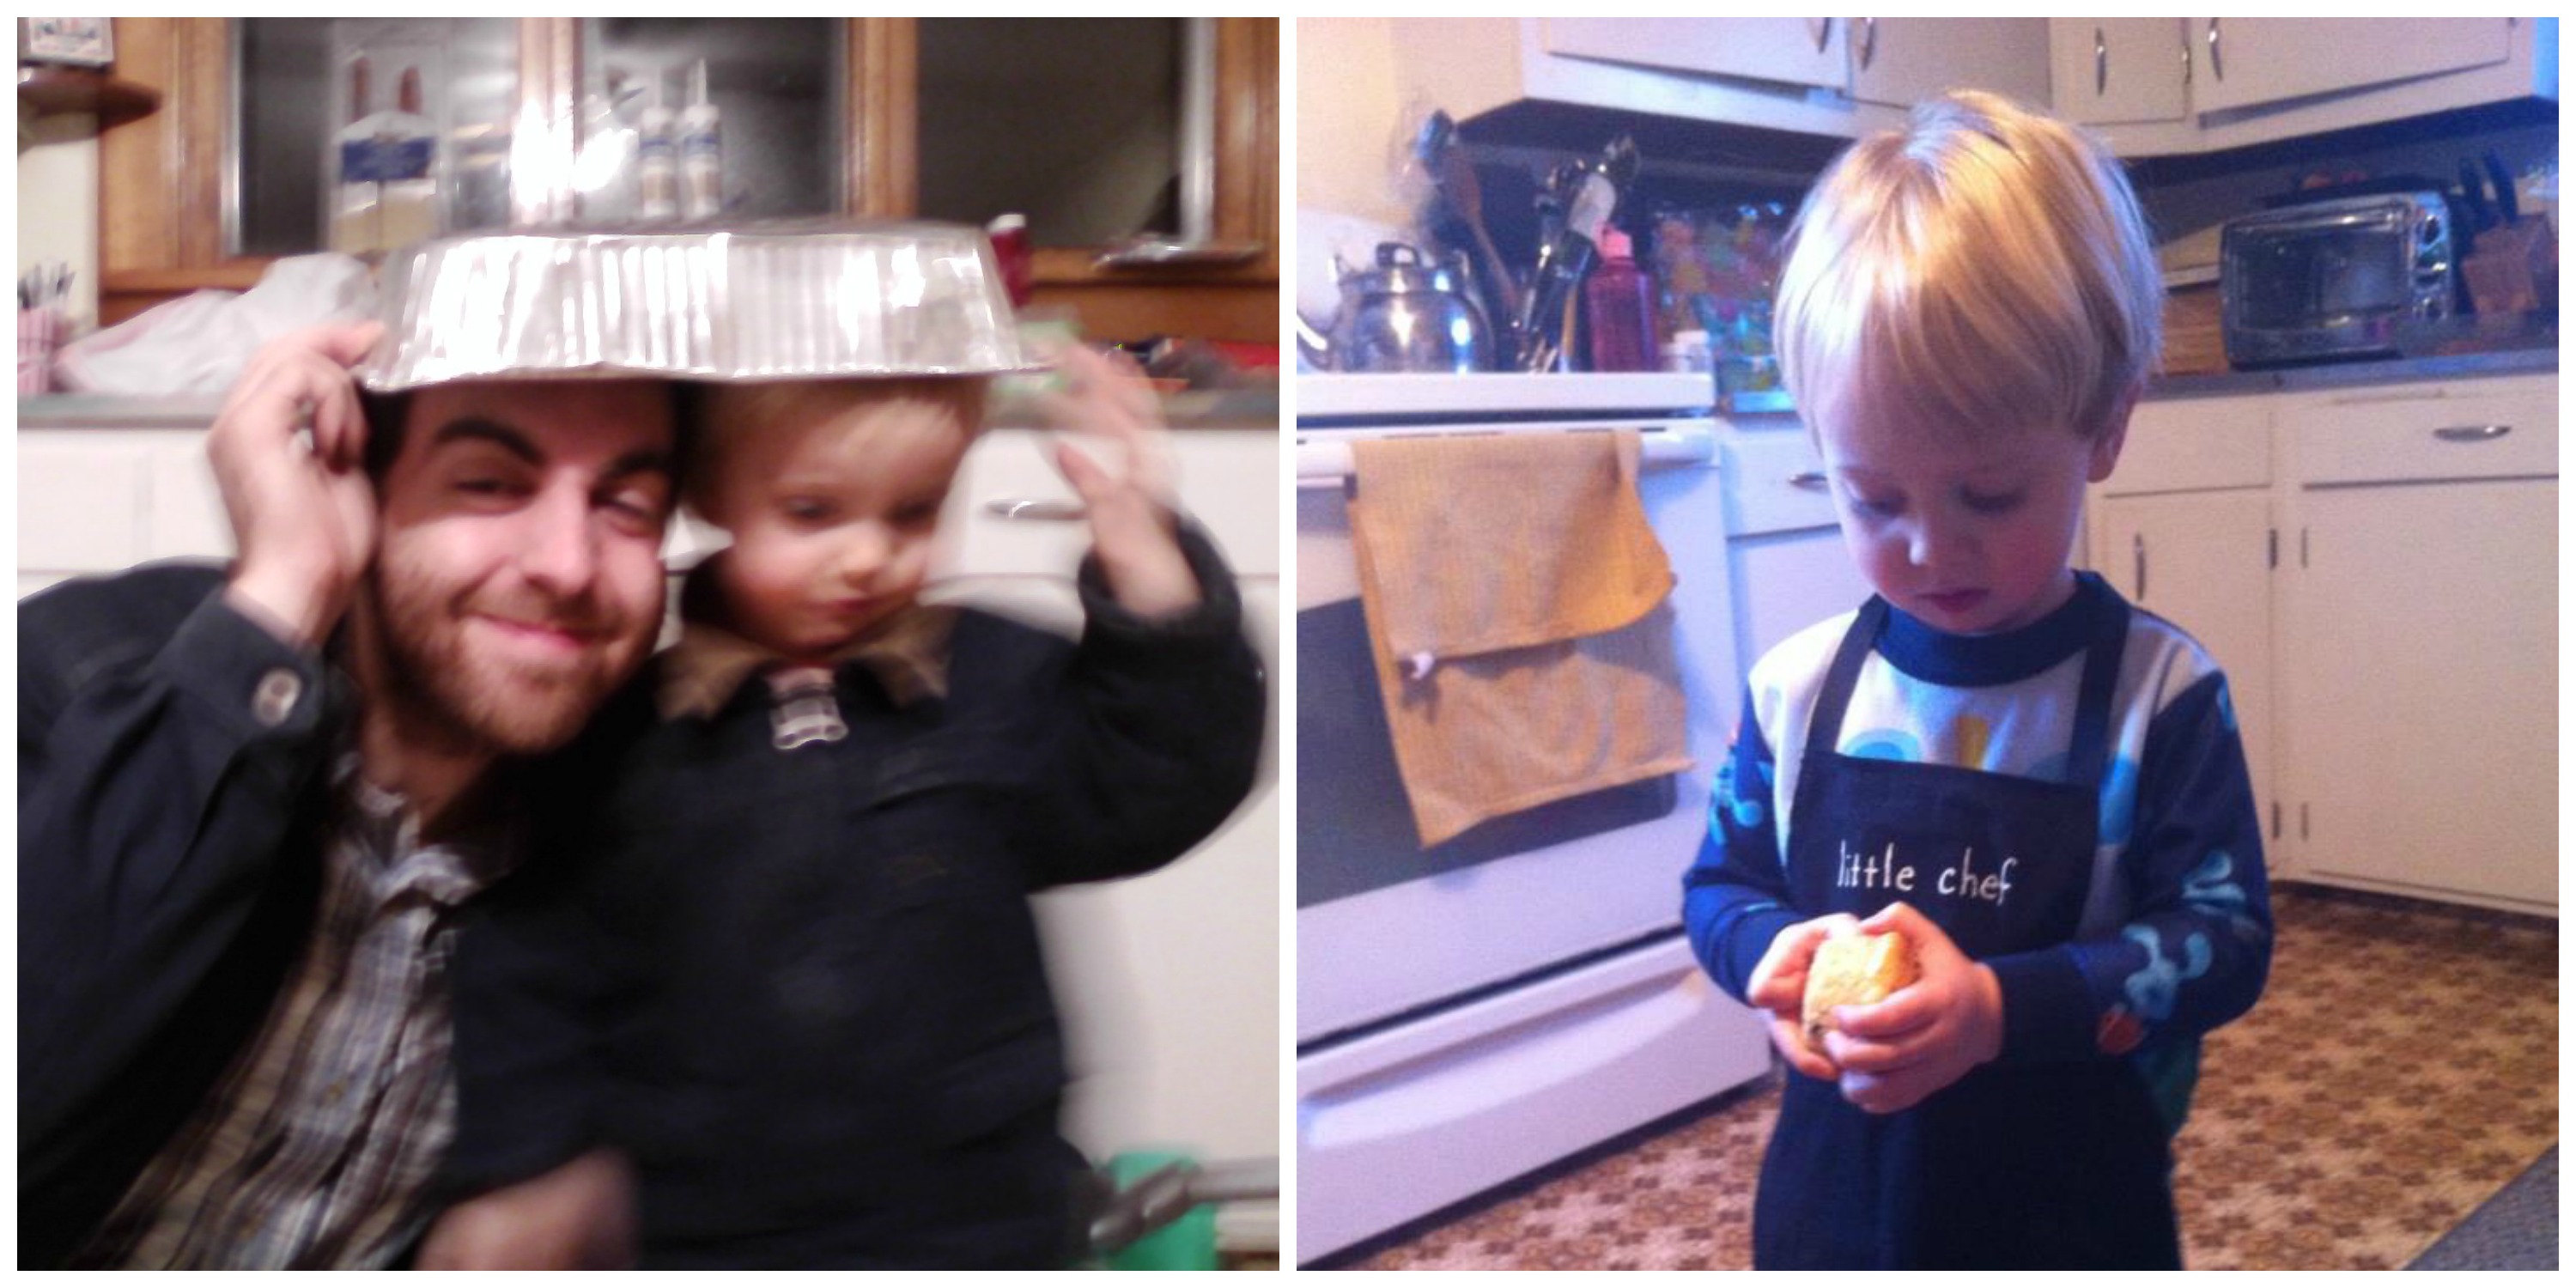 My two guys helping out in the kitchen. :)